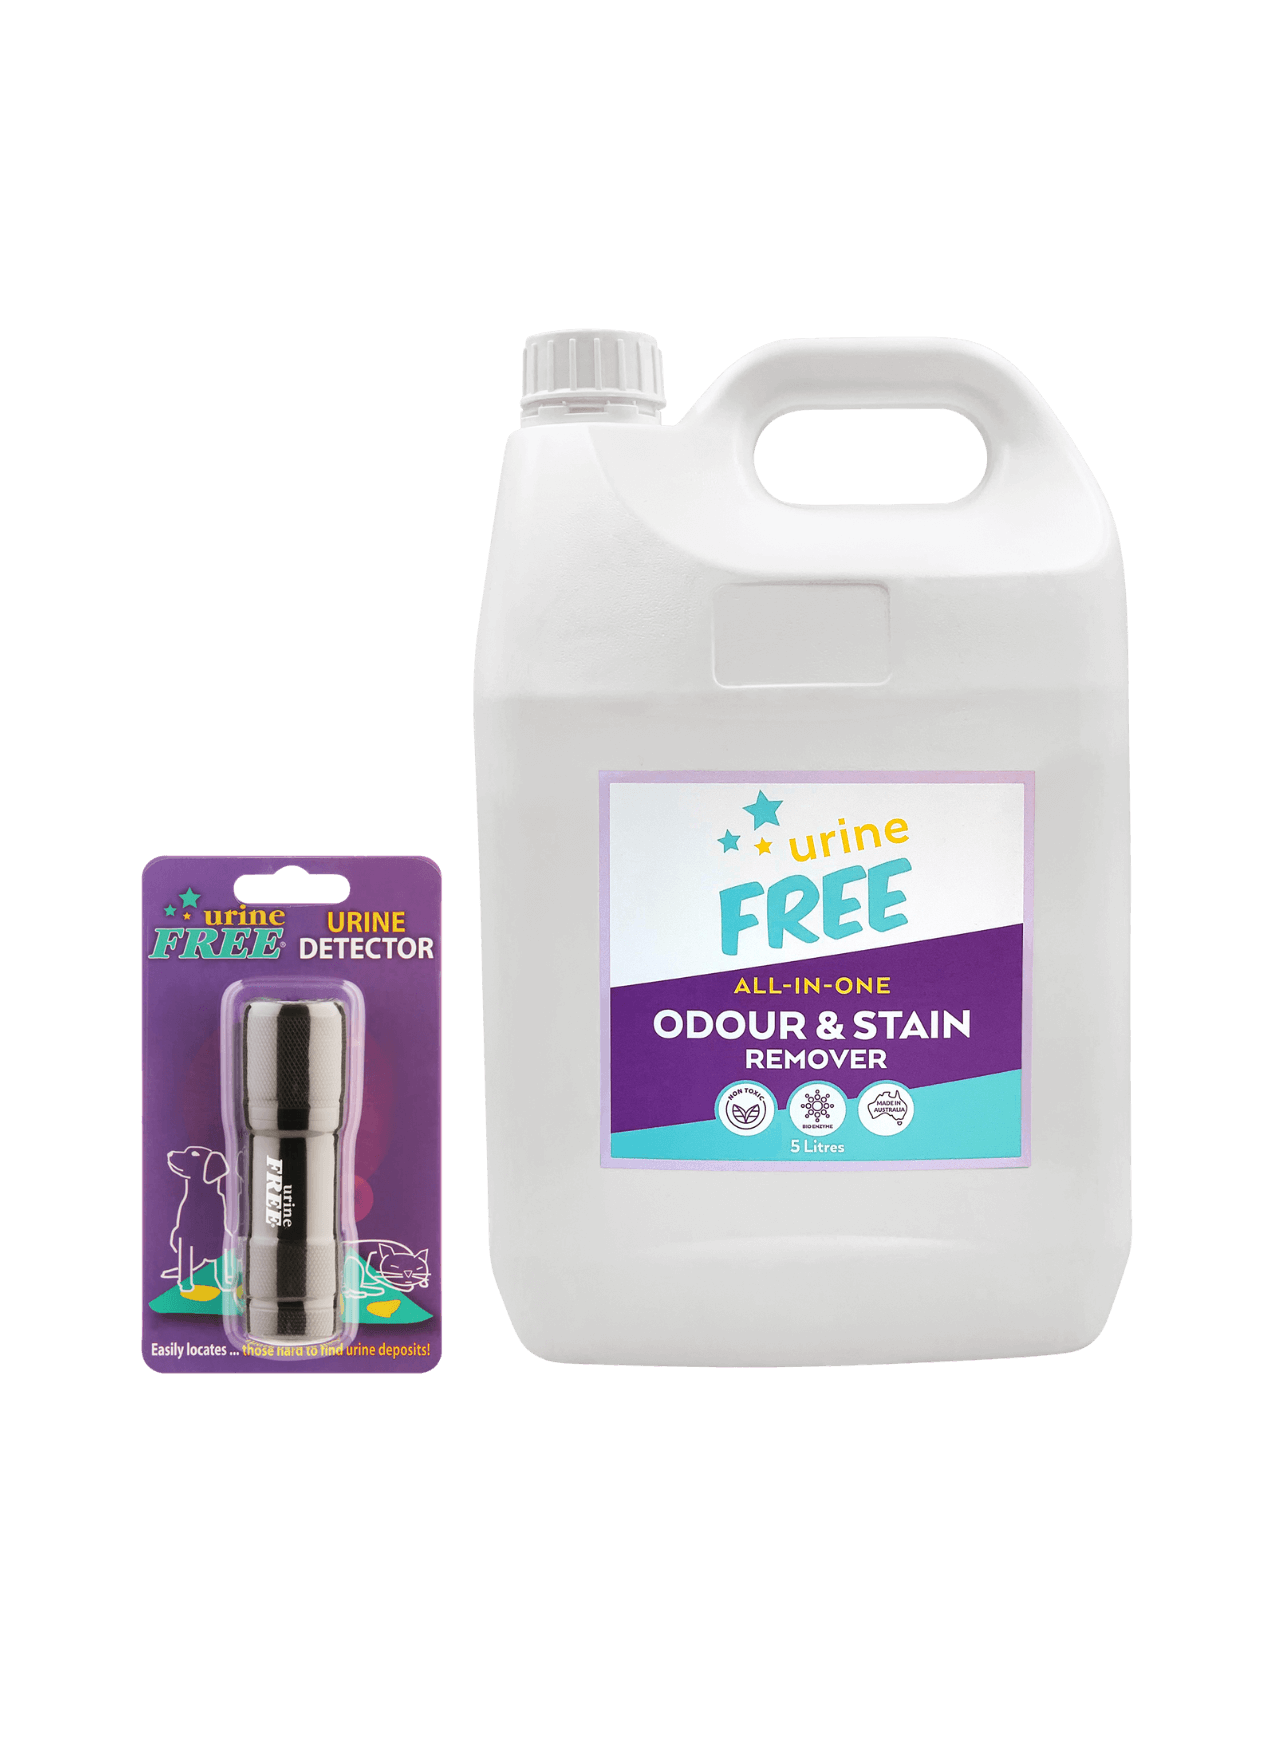 Urine Stain & Odour Remover Large Refill Bottle & Urine Detector